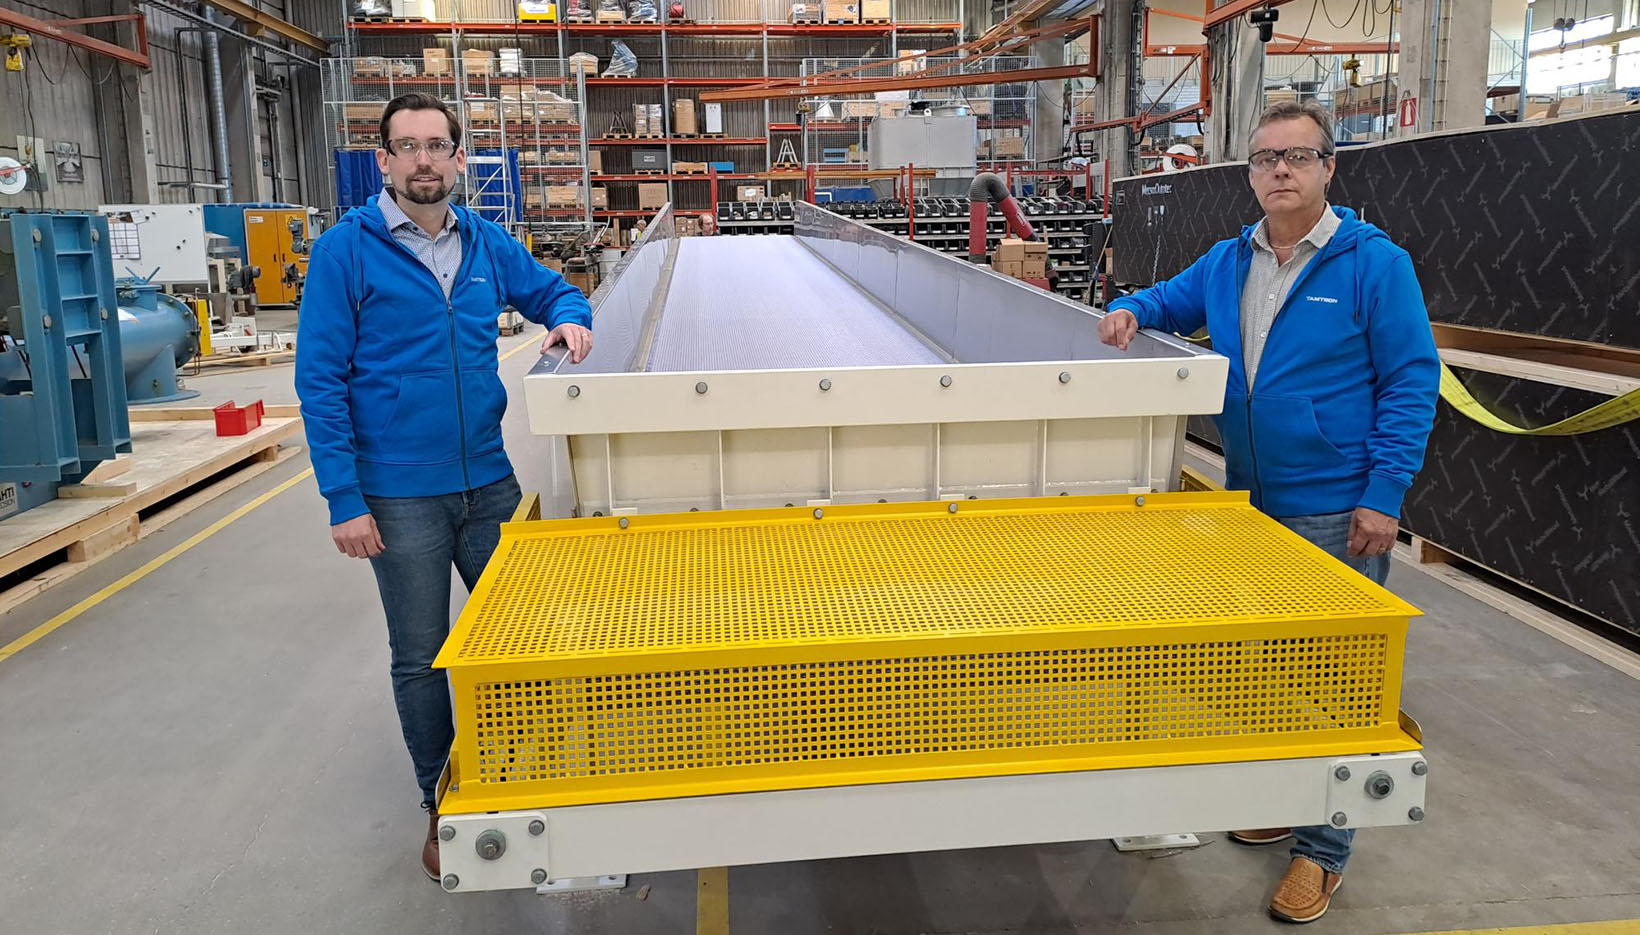 Tamtron's broke conveyor for the paper industry